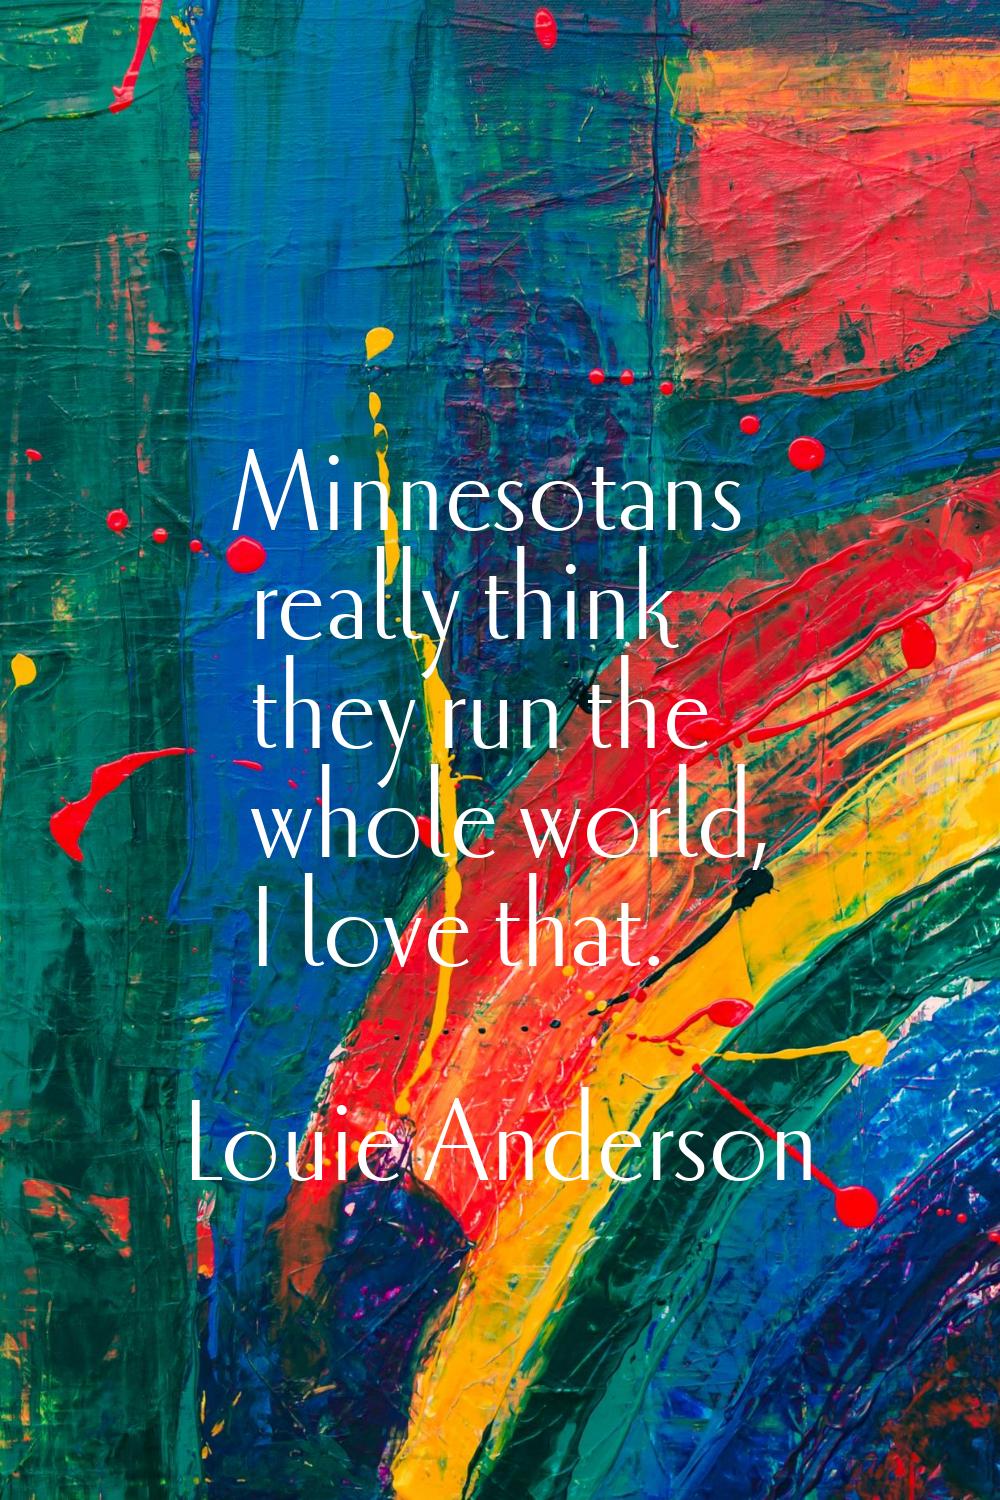 Minnesotans really think they run the whole world, I love that.